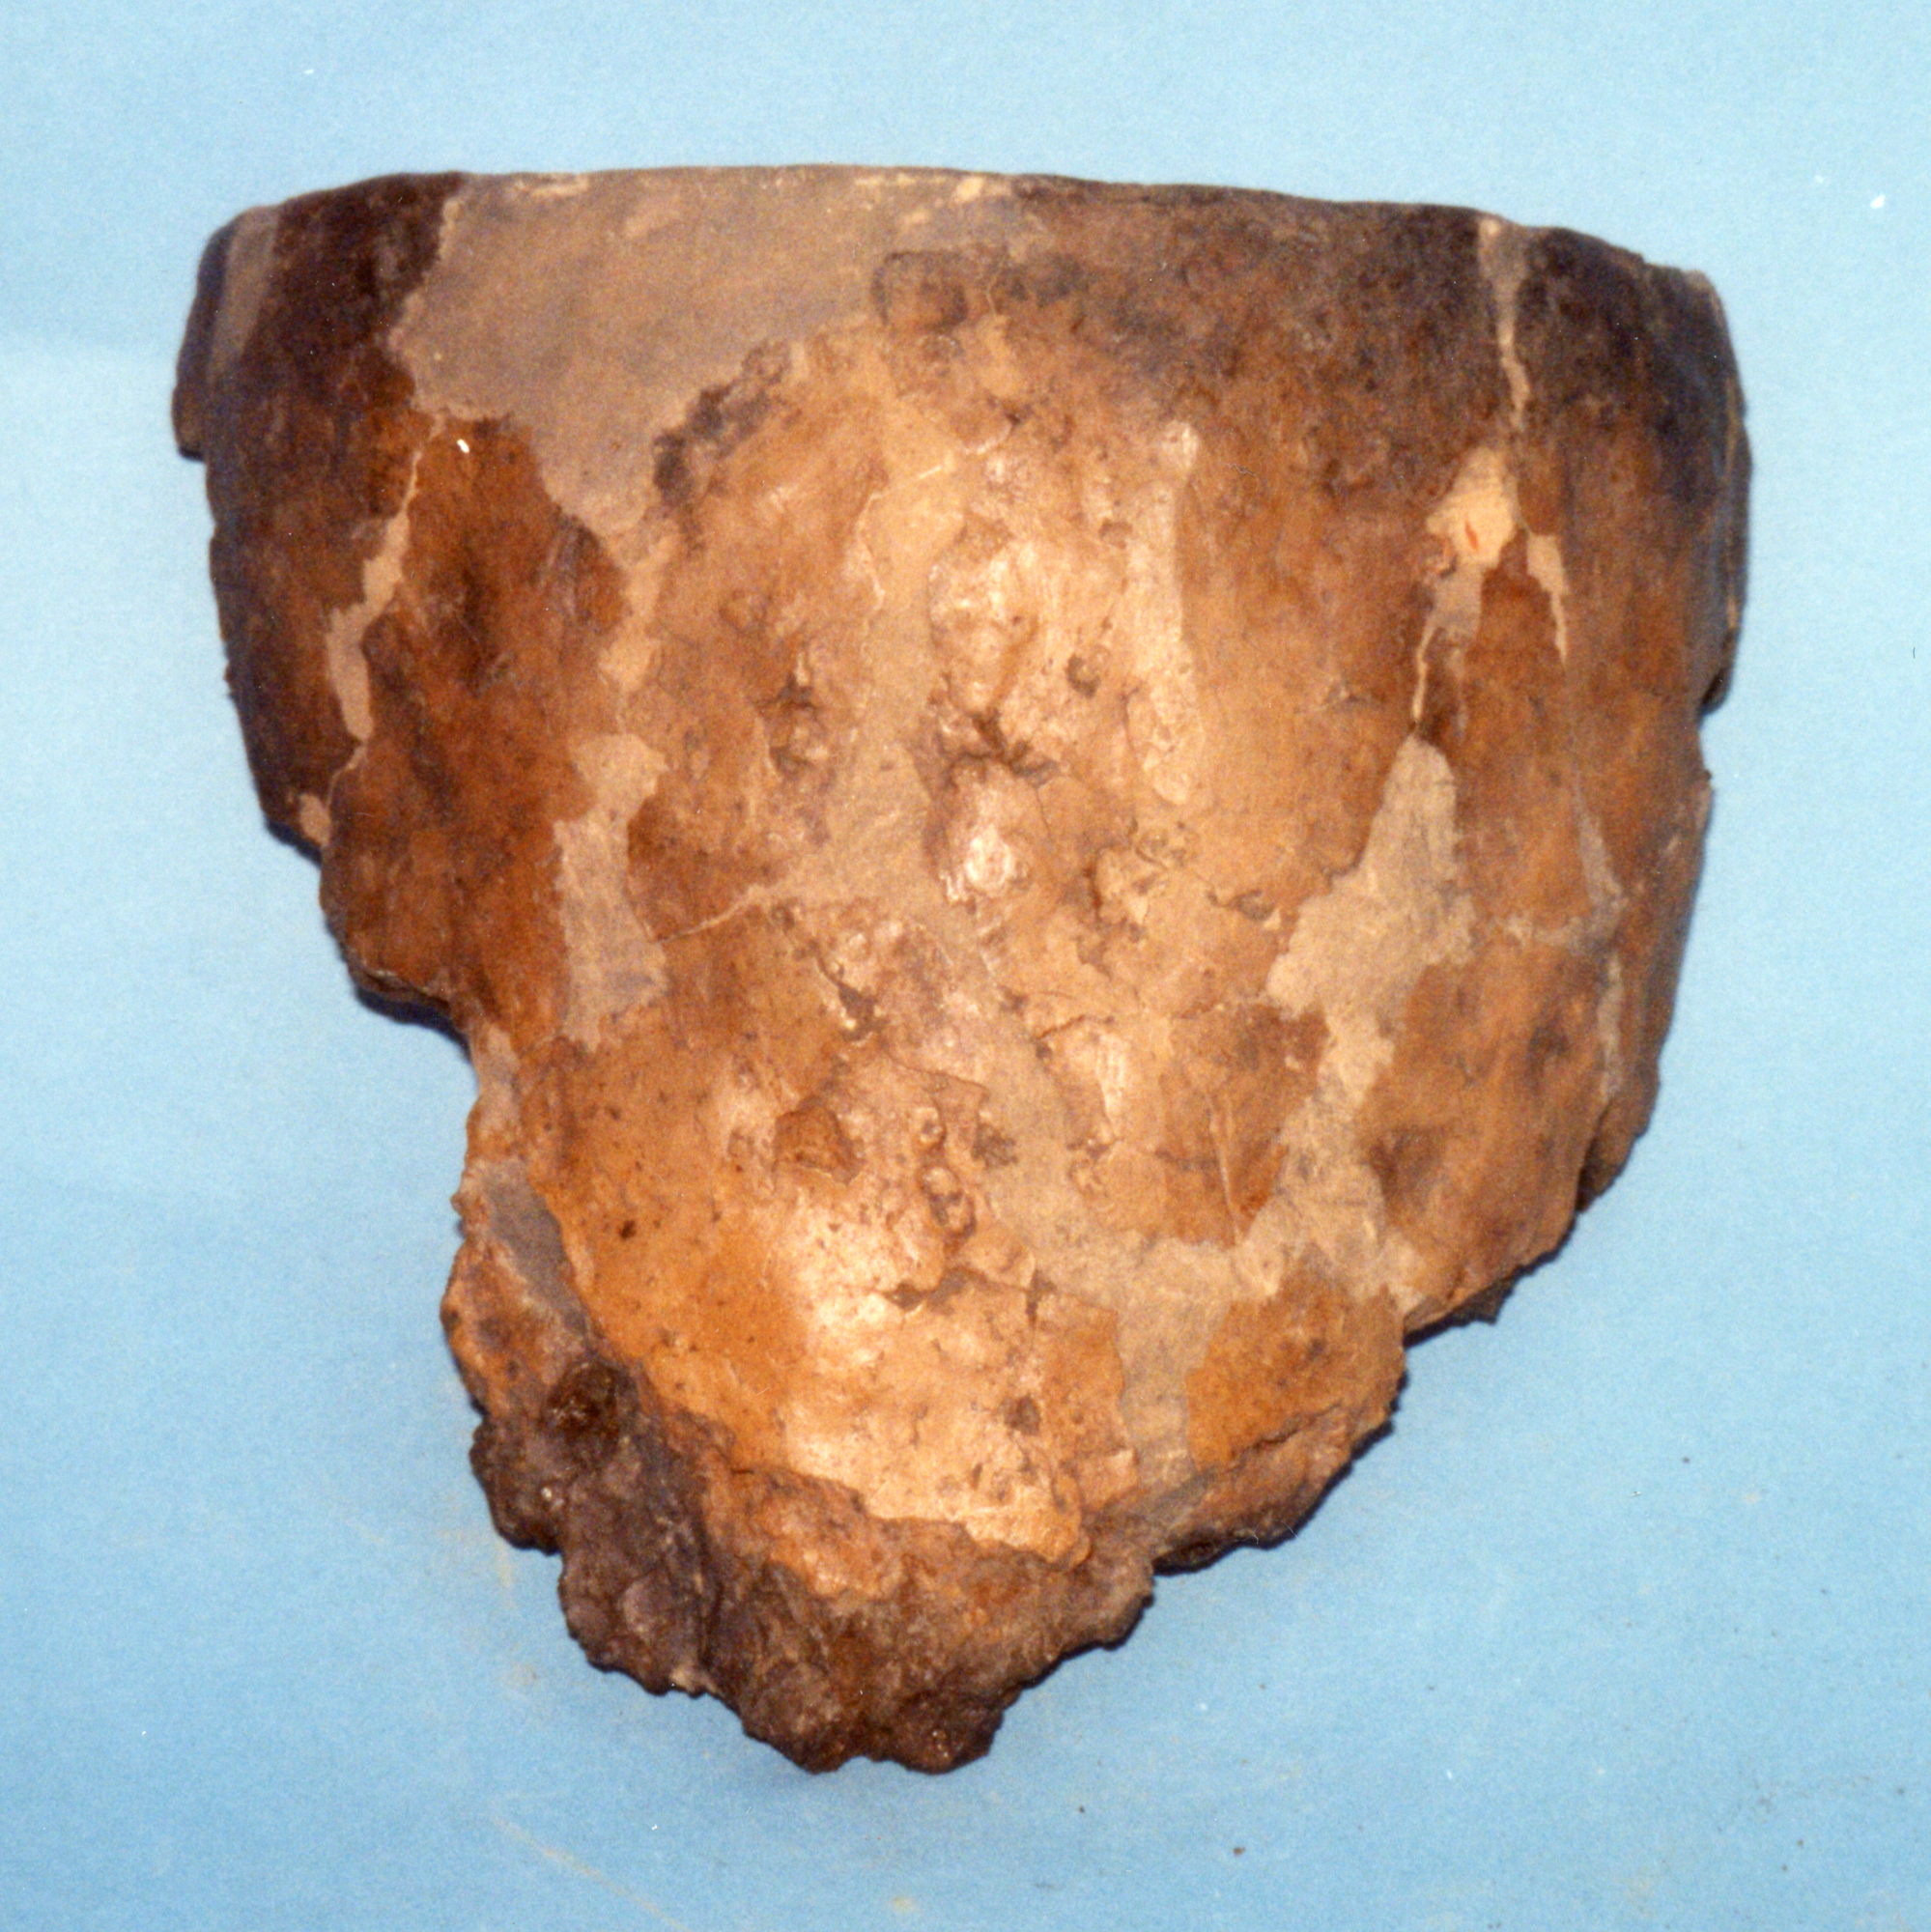 Image of Cinerary urn fragment, from Limefield Farm, Wiston, Lanarkshire © National Museums Scotland